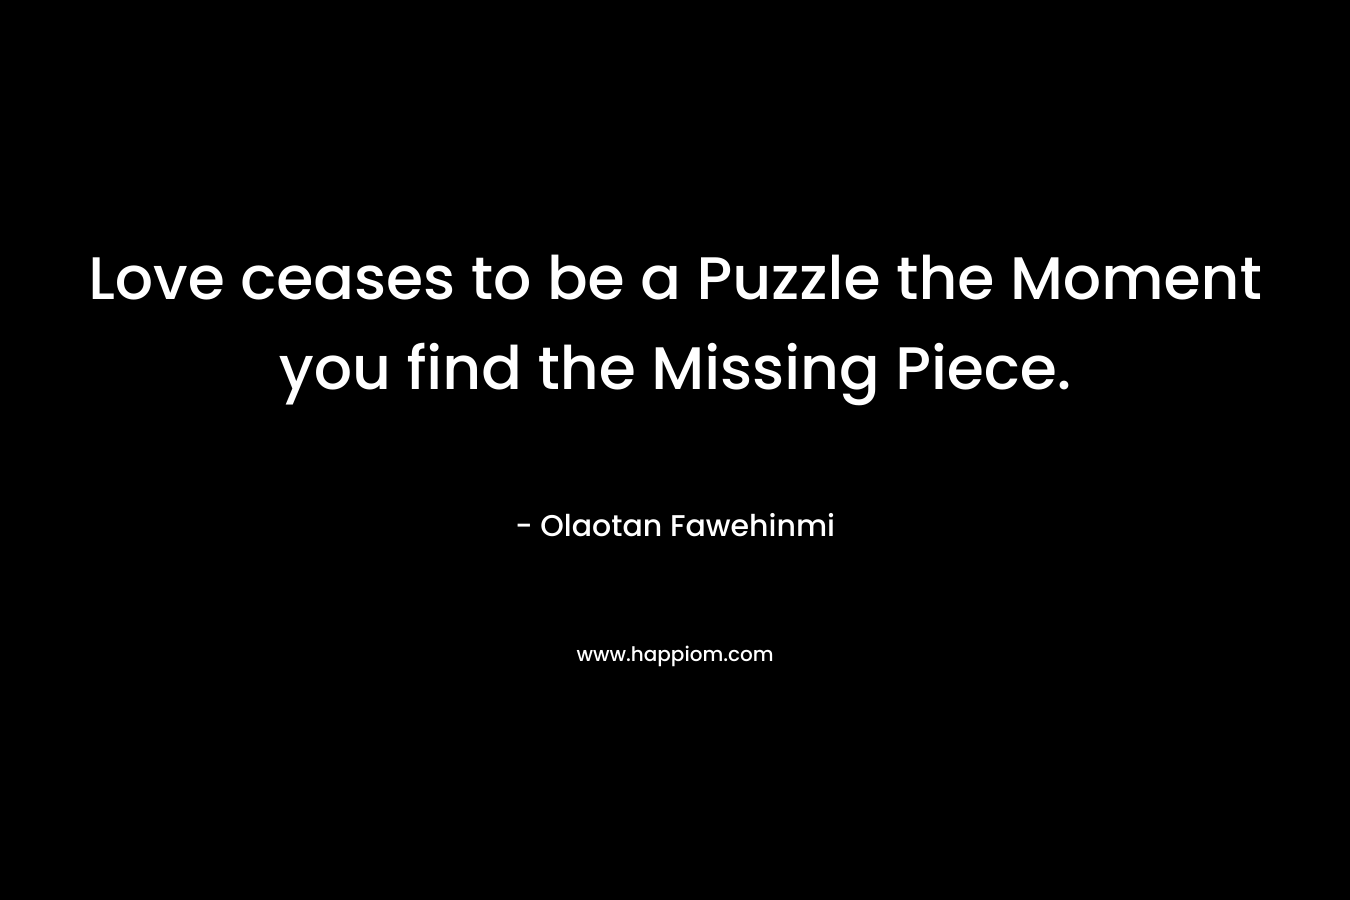 Love ceases to be a Puzzle the Moment you find the Missing Piece.